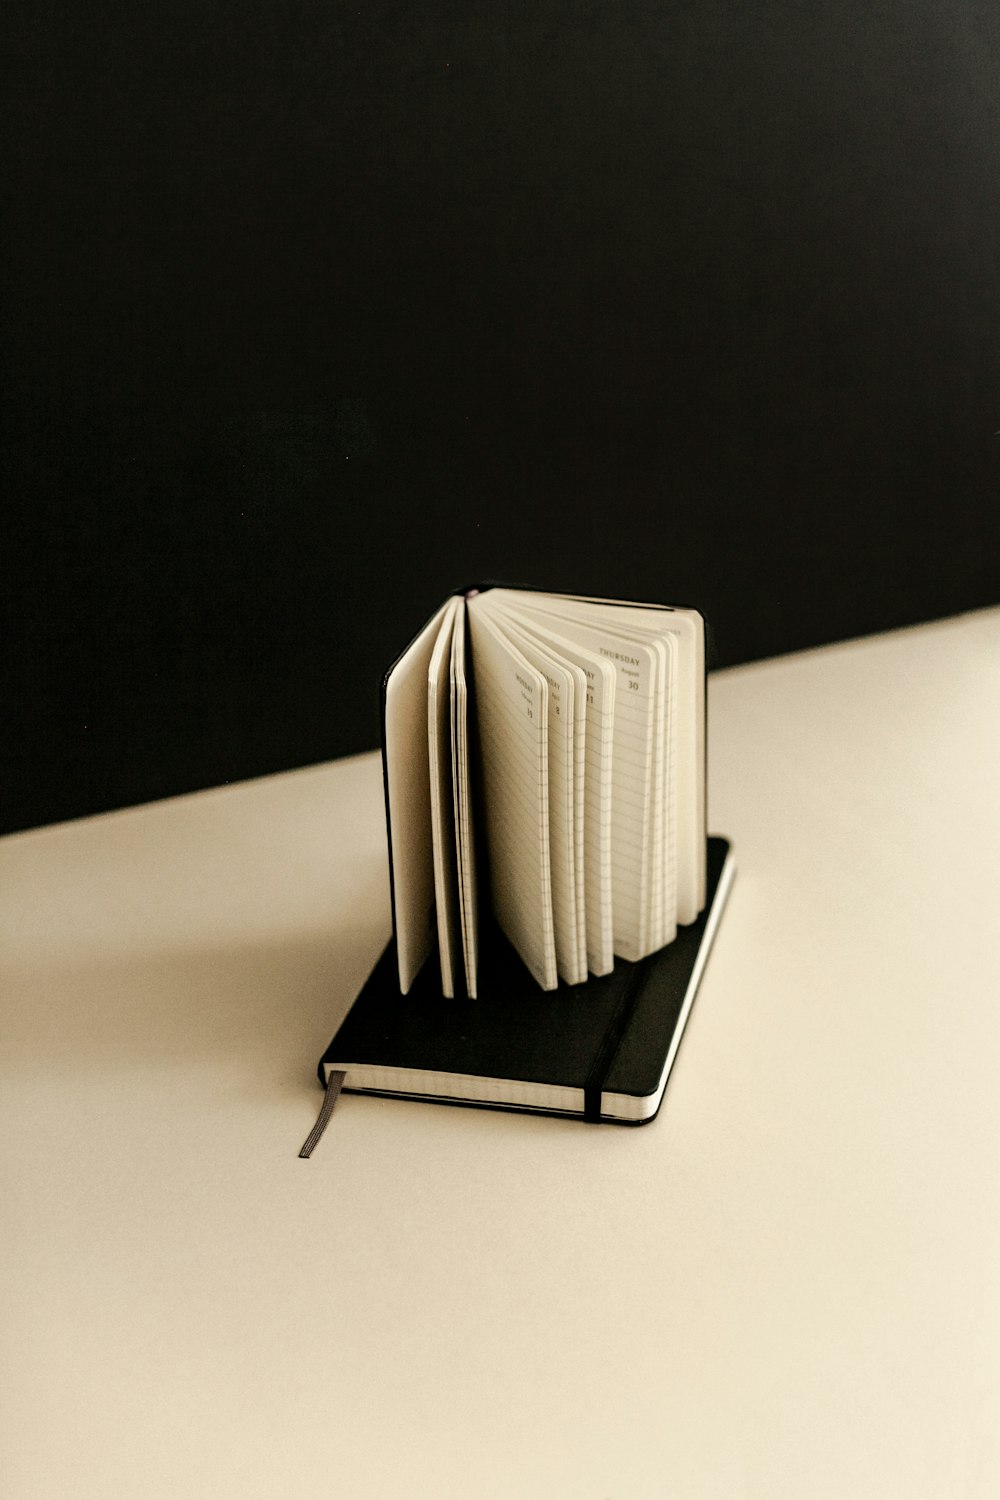 a stack of books sitting on top of a black and white book